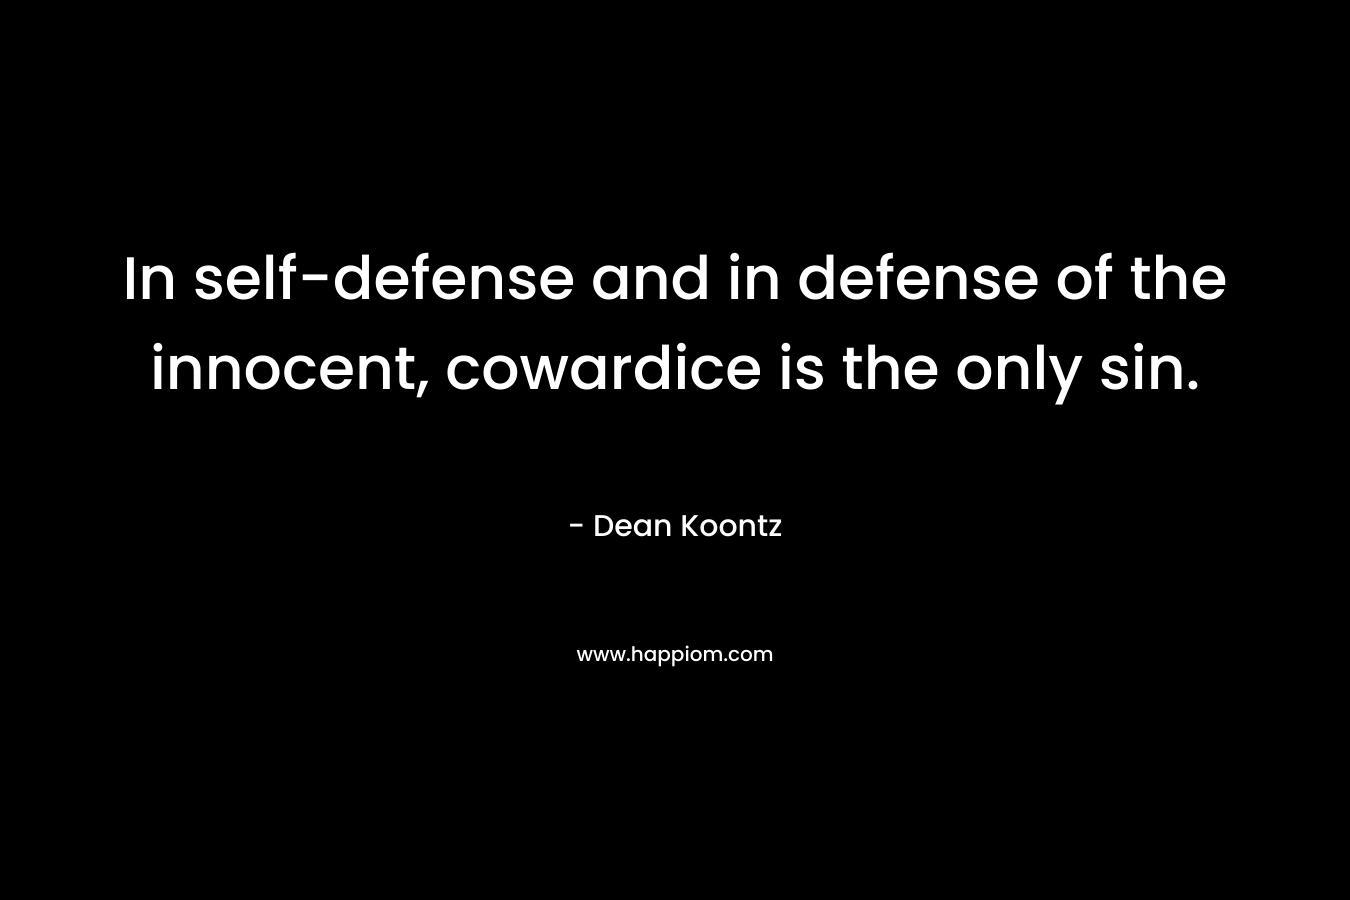 In self-defense and in defense of the innocent, cowardice is the only sin. – Dean Koontz